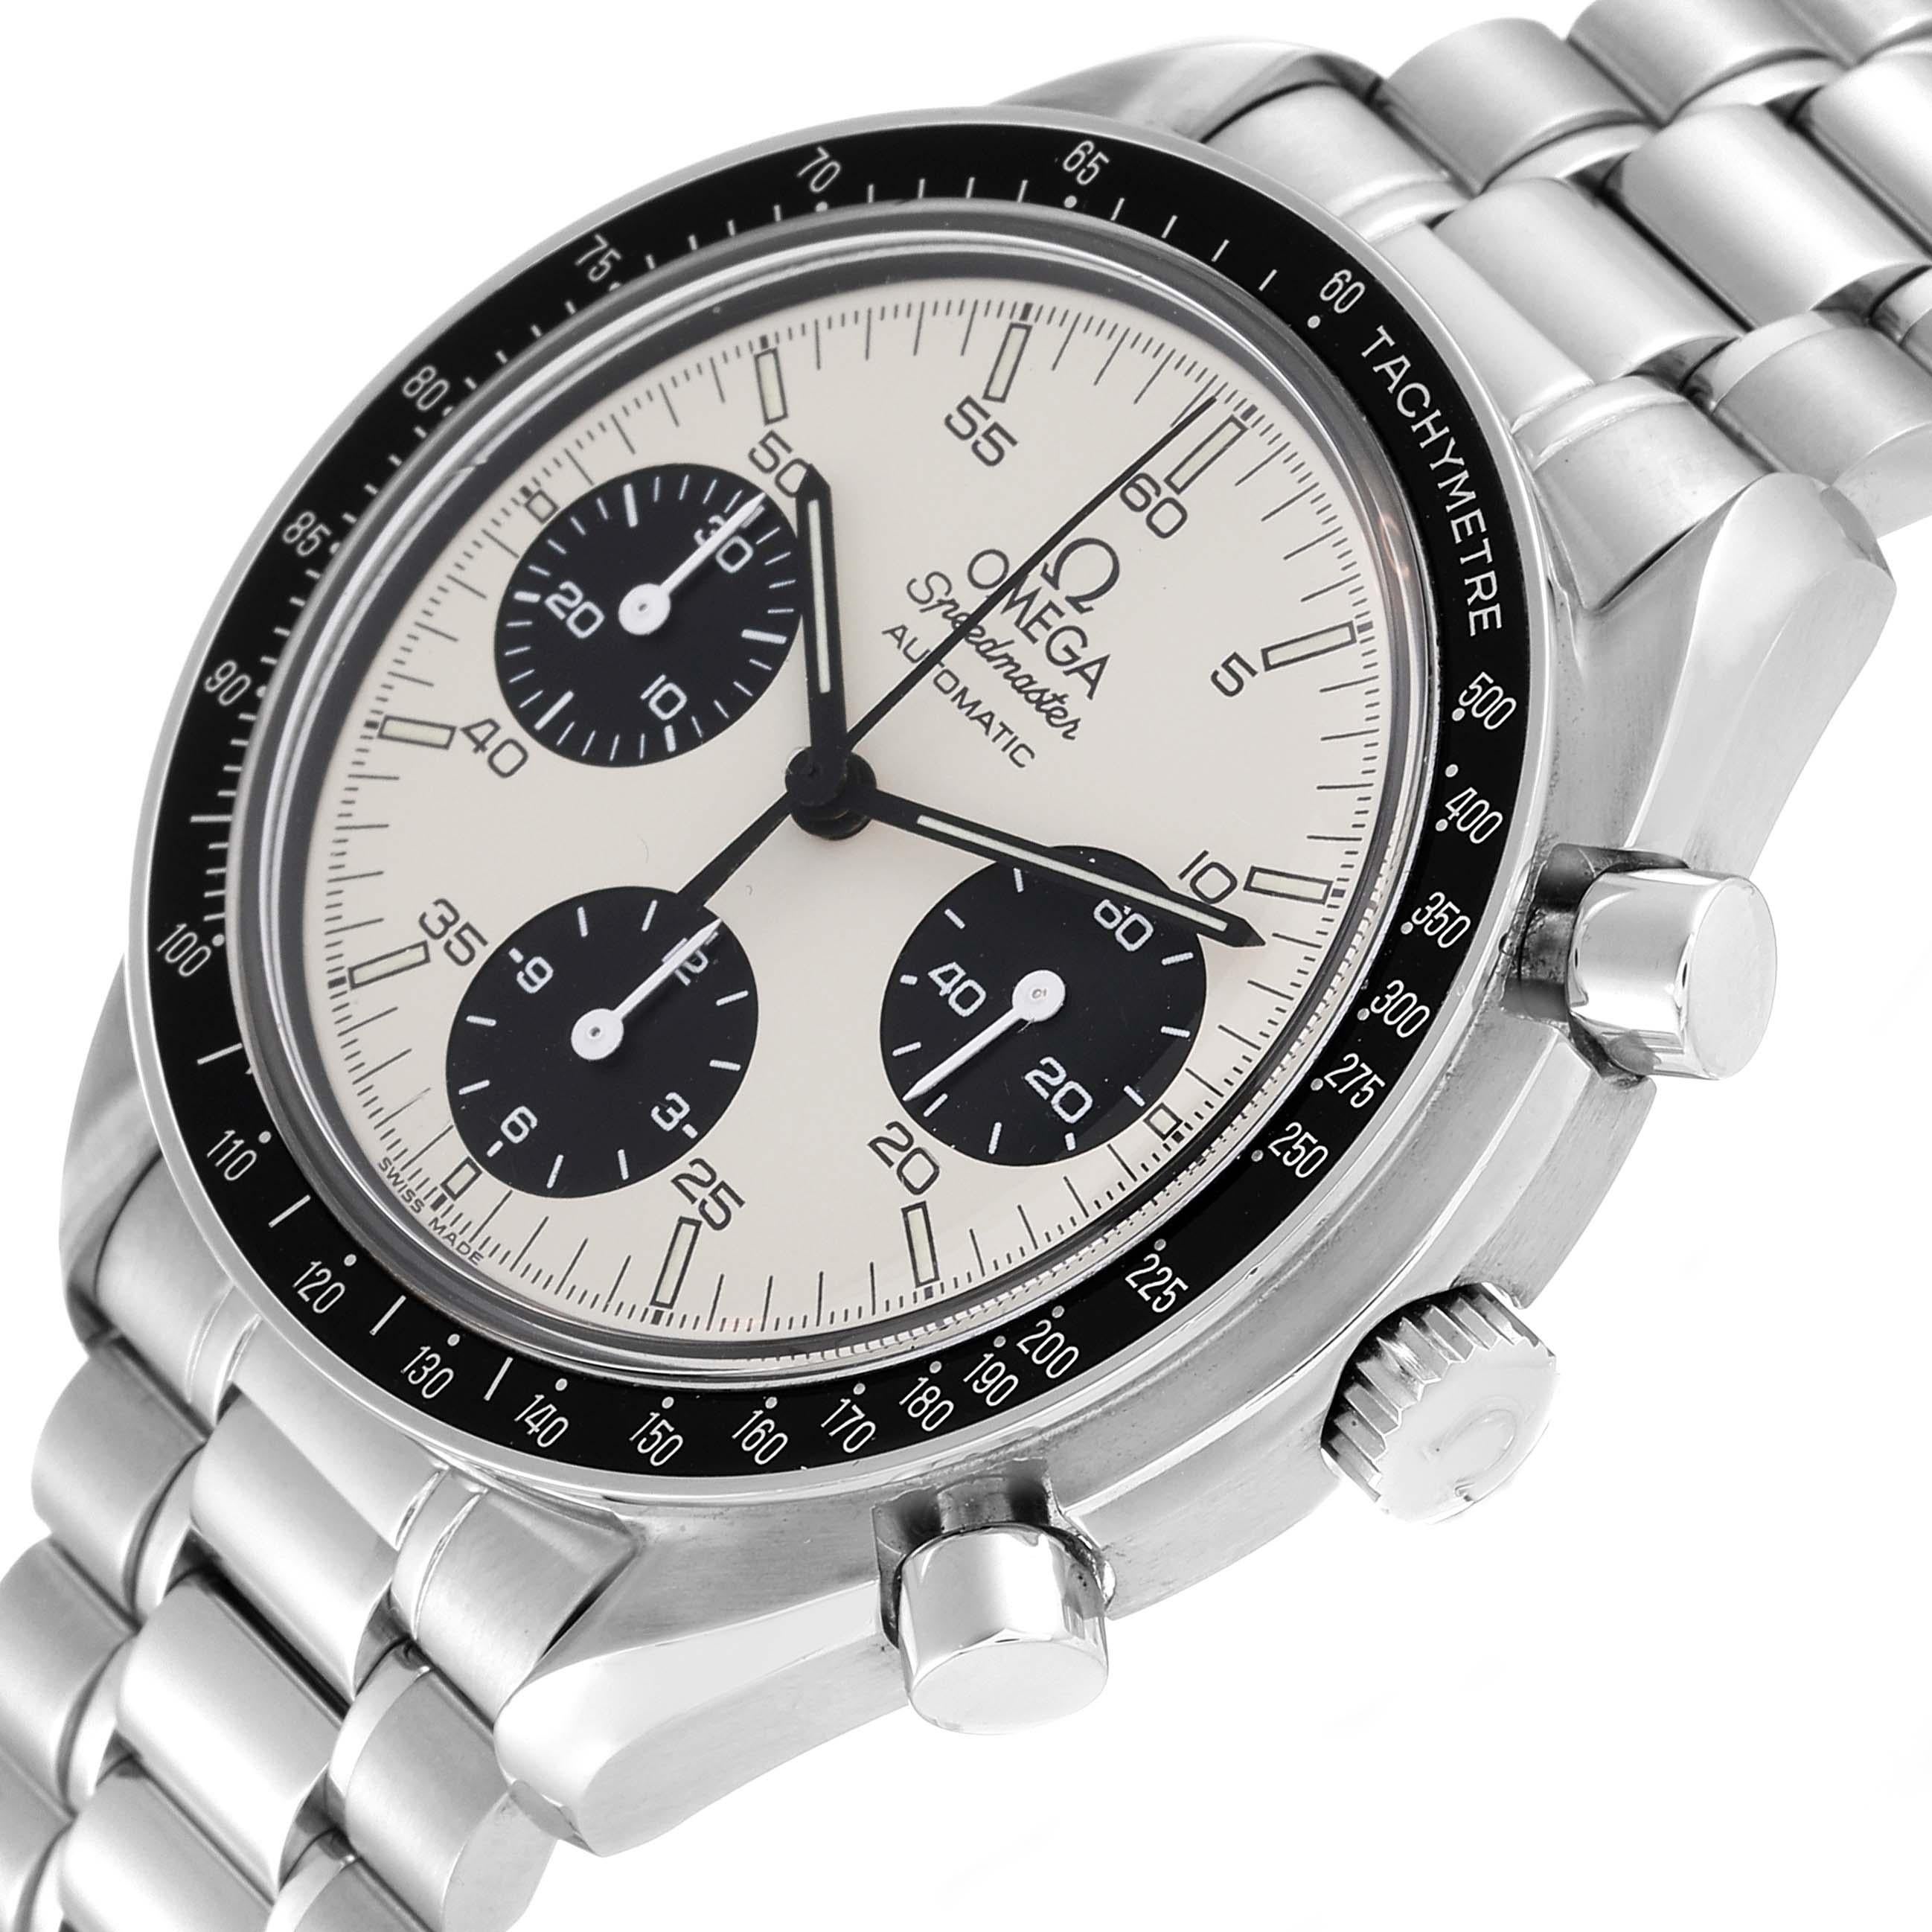 Omega Speedmaster Reduced Marui Limited Edition Steel Mens Watch 3510.21.00 Box Card. Automatic self-winding chronograph movement. Stainless steel round case 39 mm in diameter. Black bezel with tachymetre function. Hesalite crystal. Silver dial with